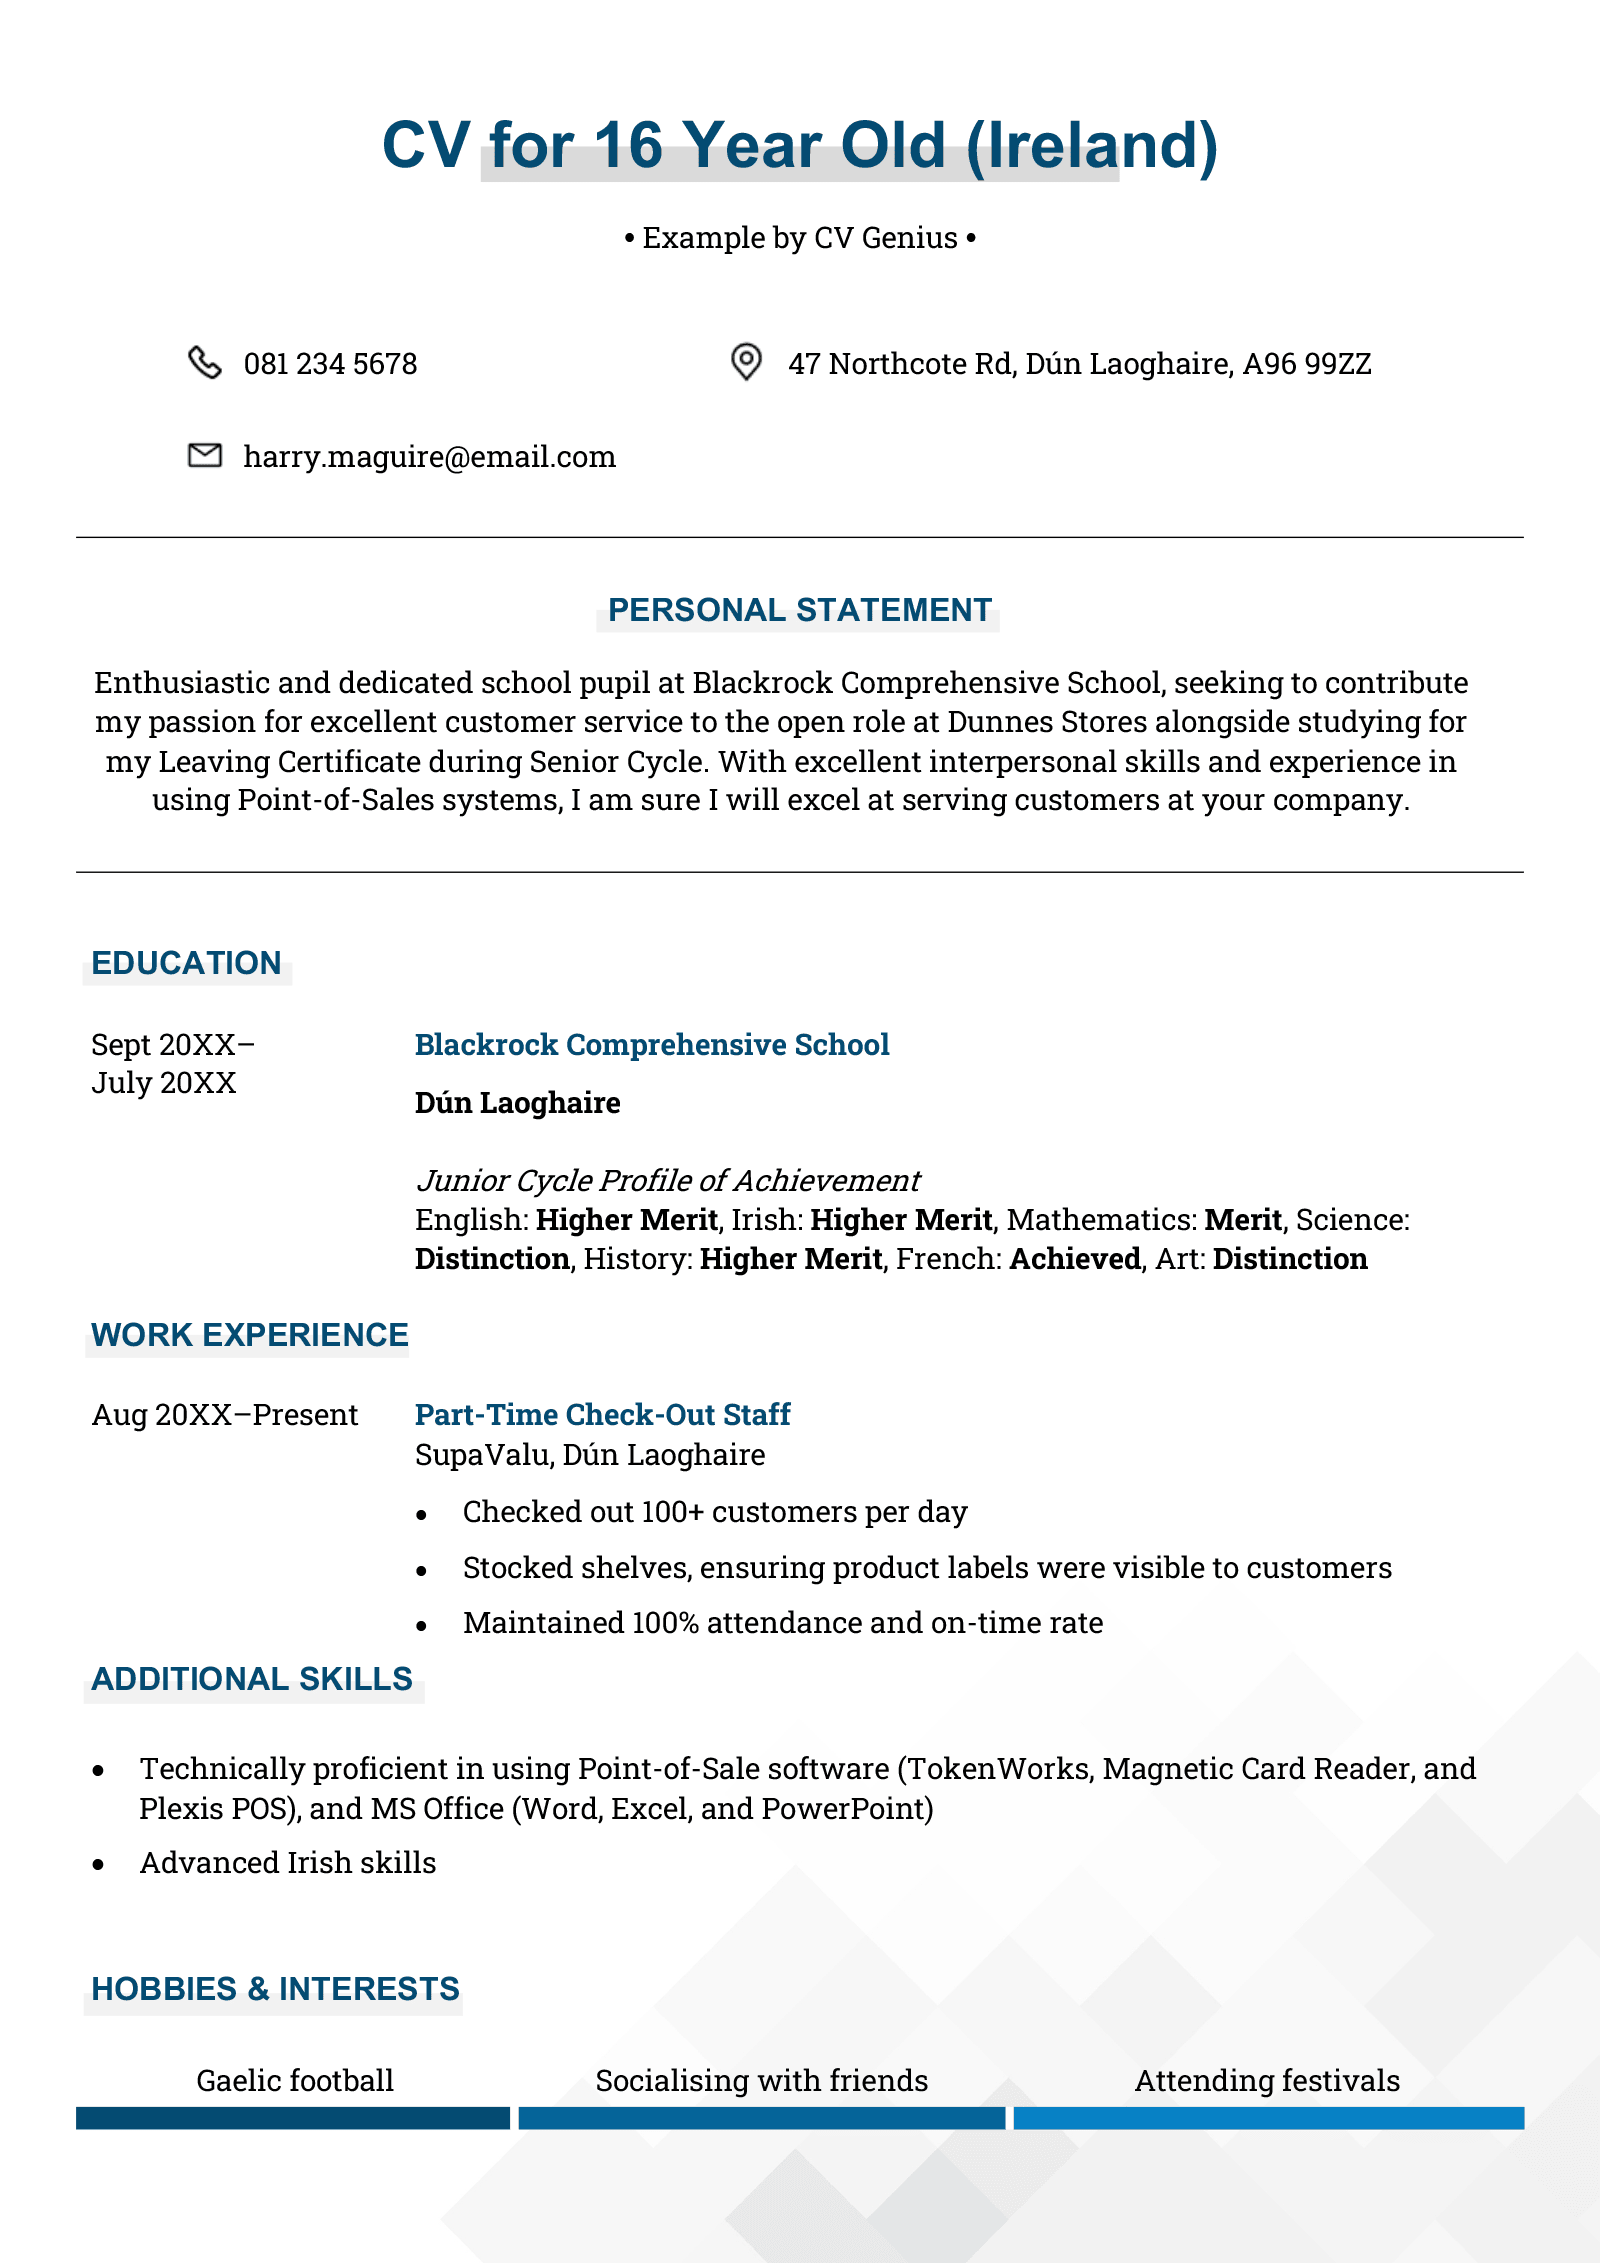 A CV example for a 16 year old in Ireland that features a blue colour scheme and a one-page format.